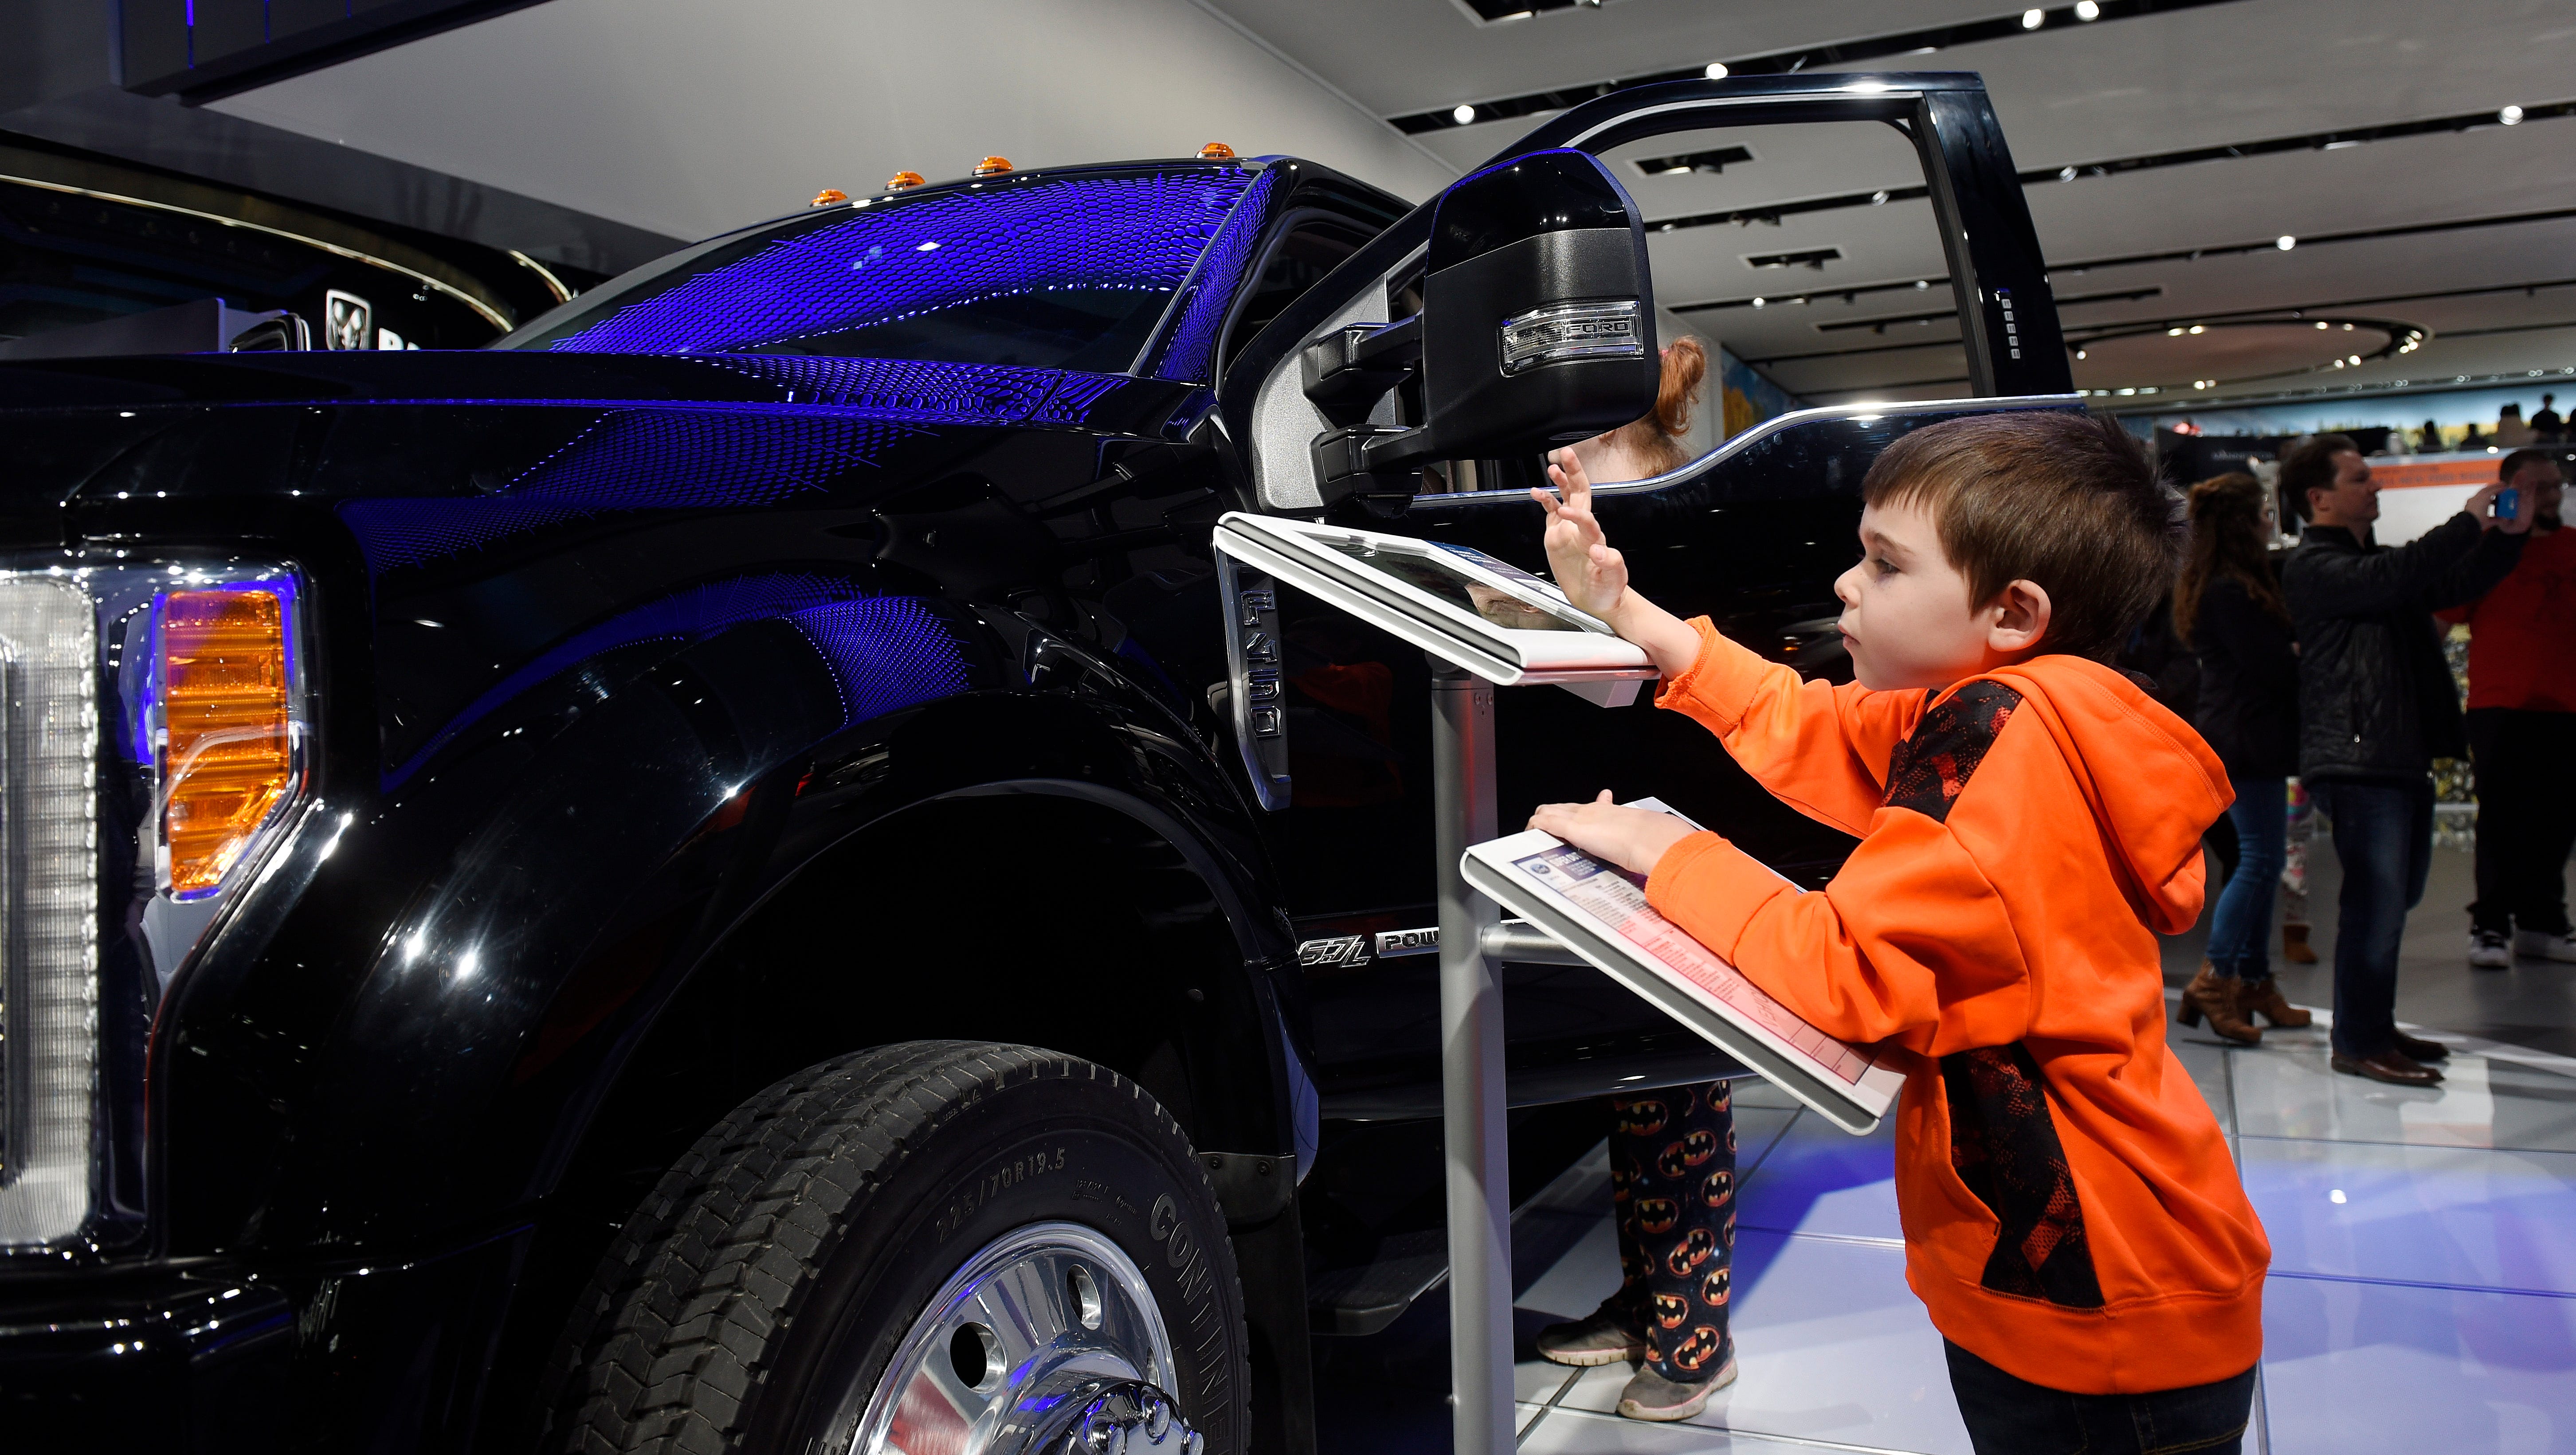 Daniel Pershyn-Tikh, 6, of Bloomfield Hills, interacts with the 2018 Ford F450 Super Duty electronic information wheel stand.